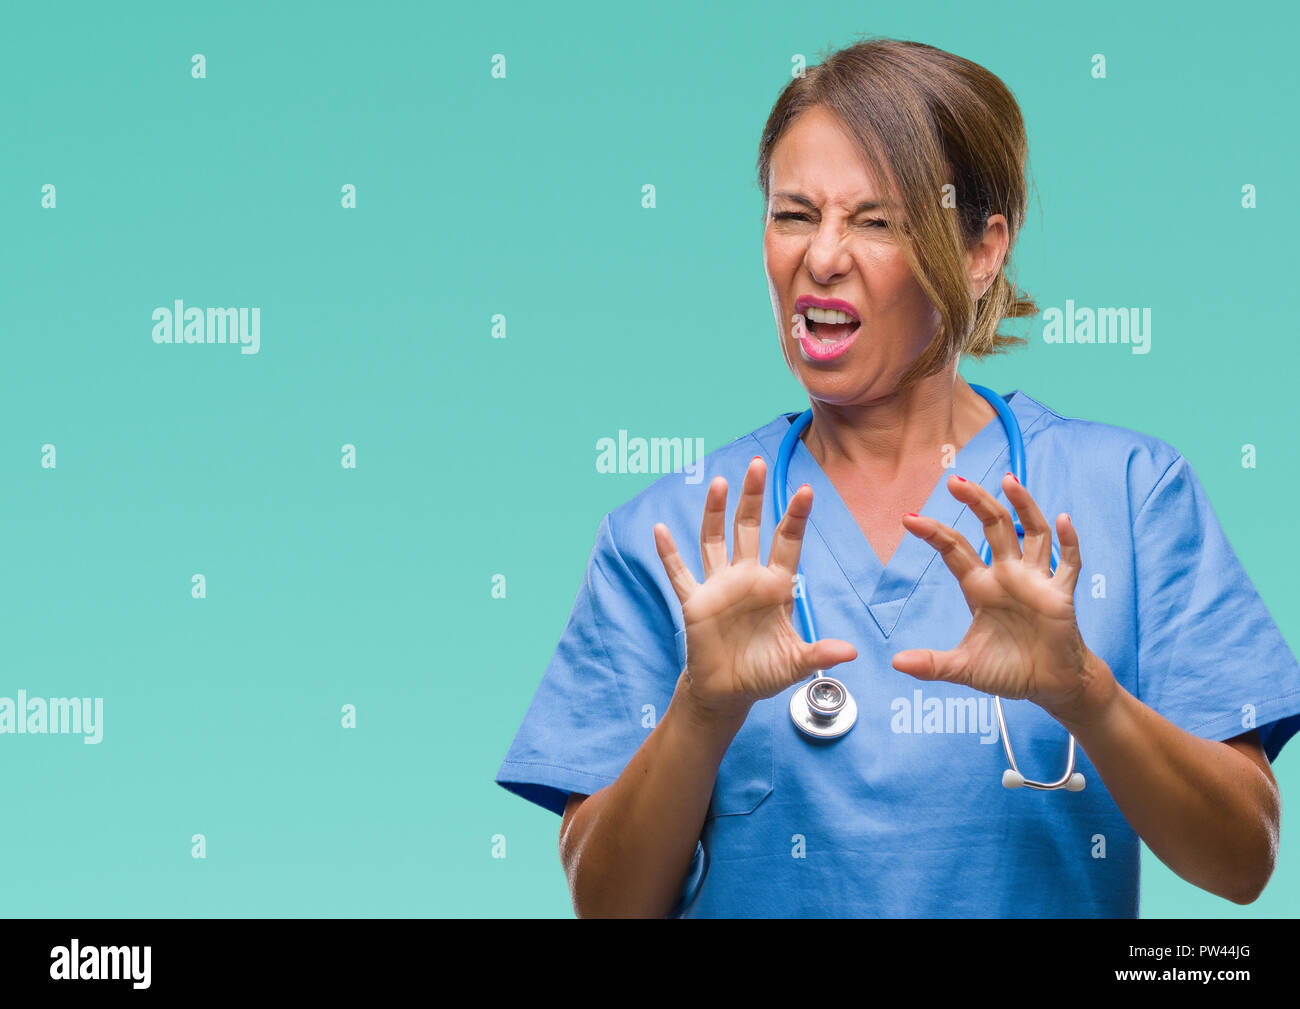 middle-age-senior-nurse-doctor-woman-over-isolated-background-disgusted-expression-displeased-and-fearful-doing-disgust-face-because-aversion-reactio-PW44JG.jpg